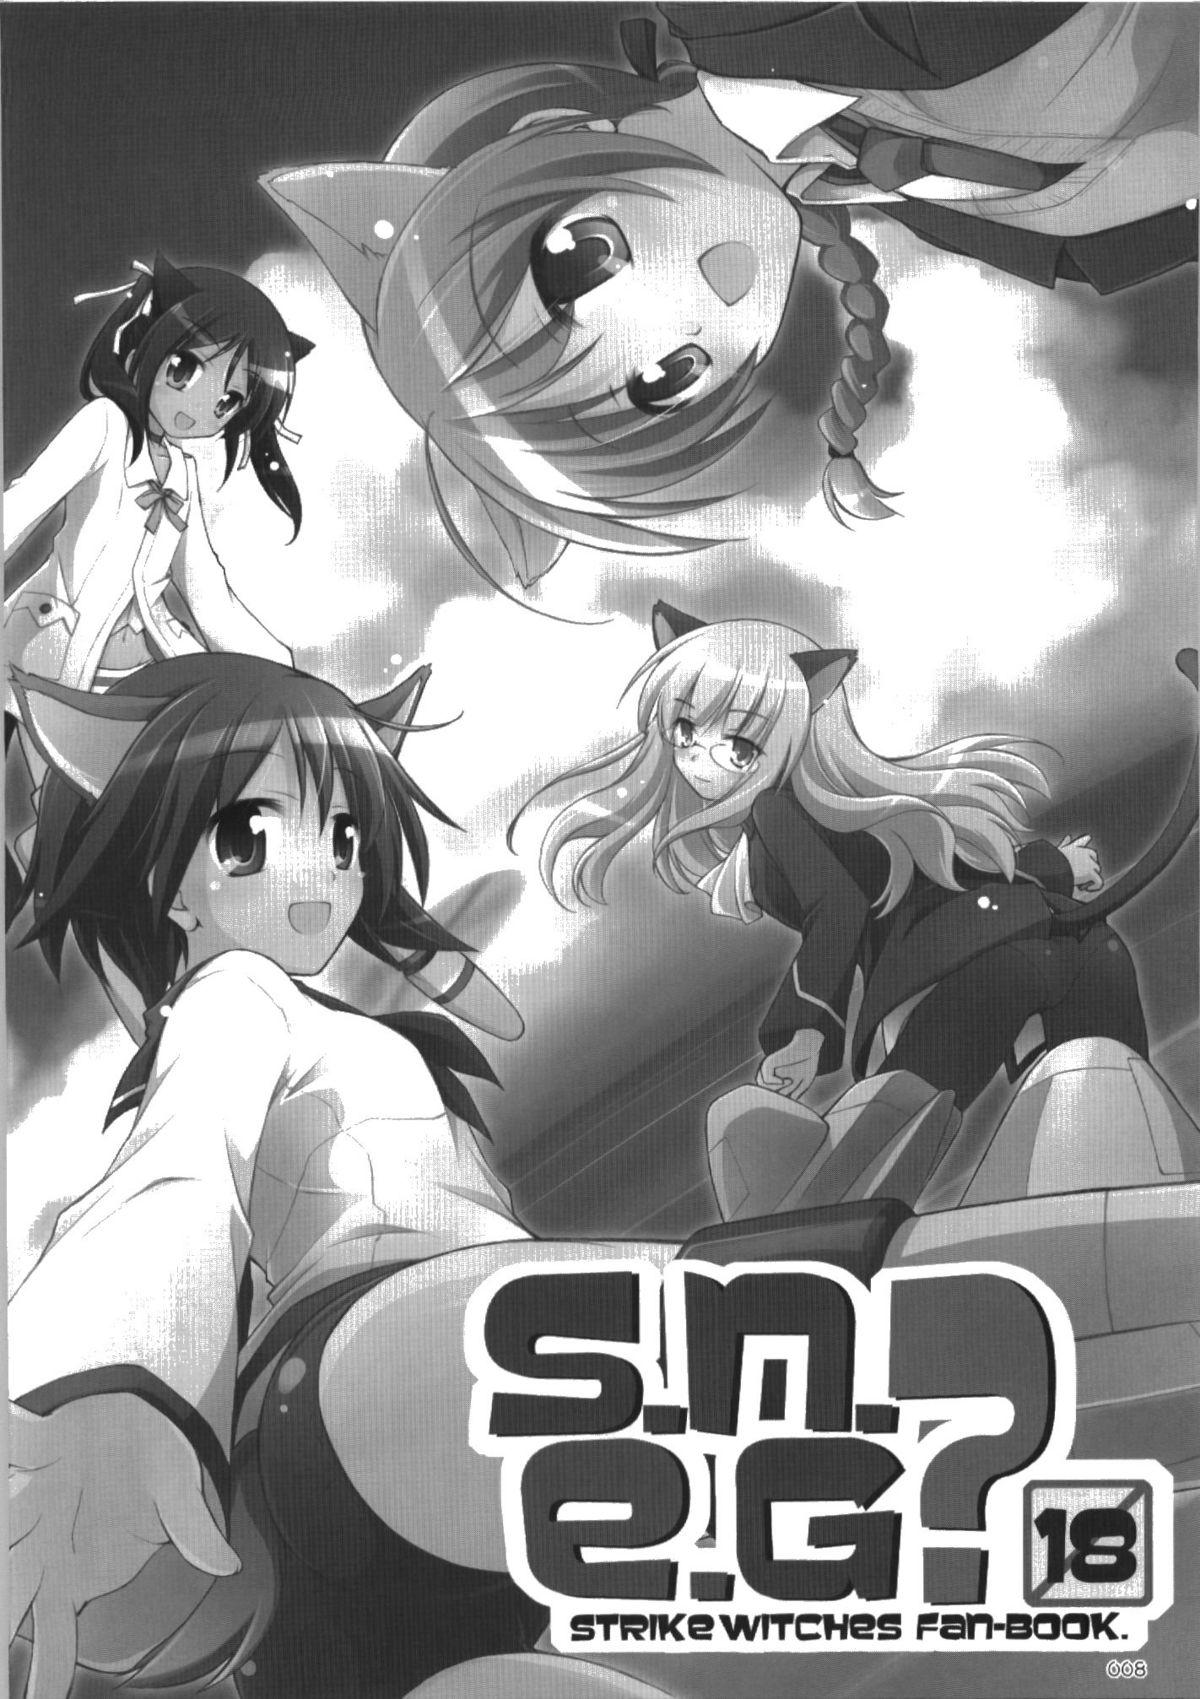 Shaking s.n.e.g? - Strike witches Prima - Page 8